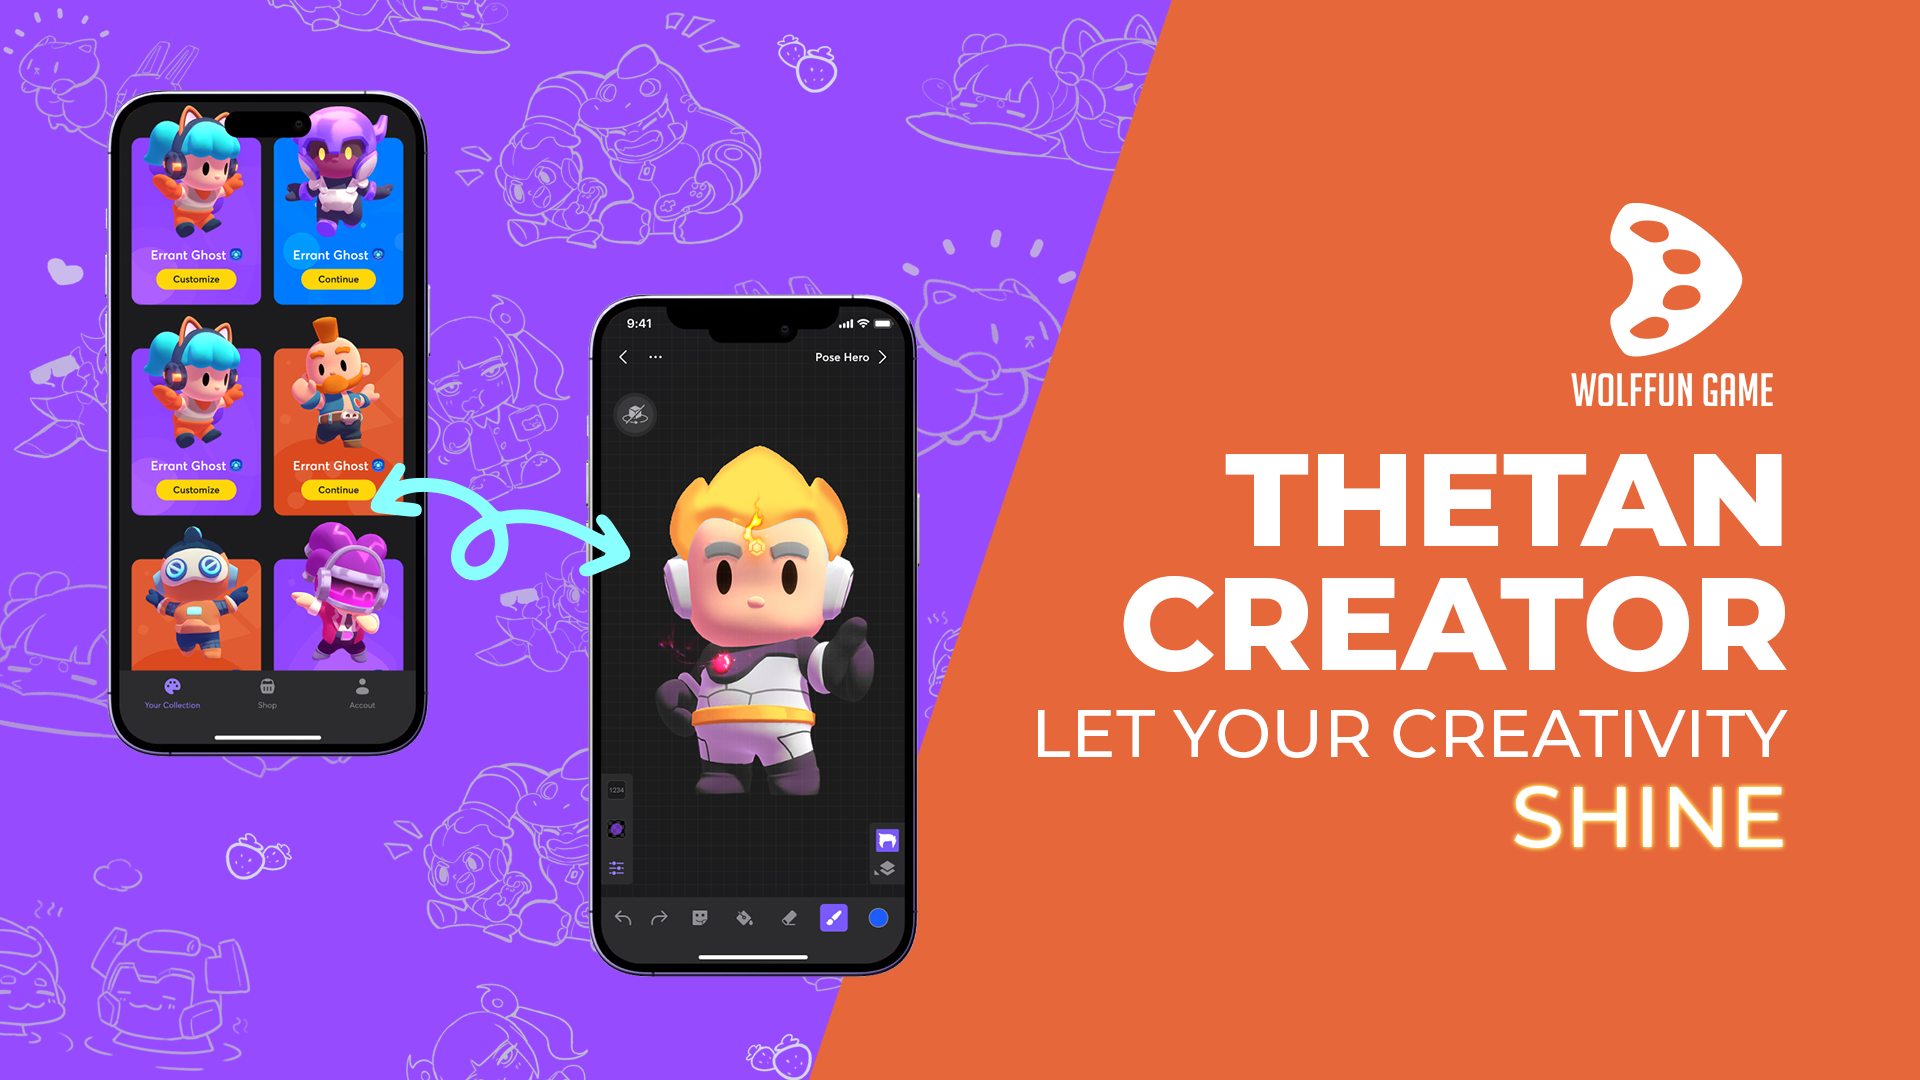 Web3 Gaming Week: Unleash Your Creativity and Racing Skills with Thetan Creator and Thetan Rivals